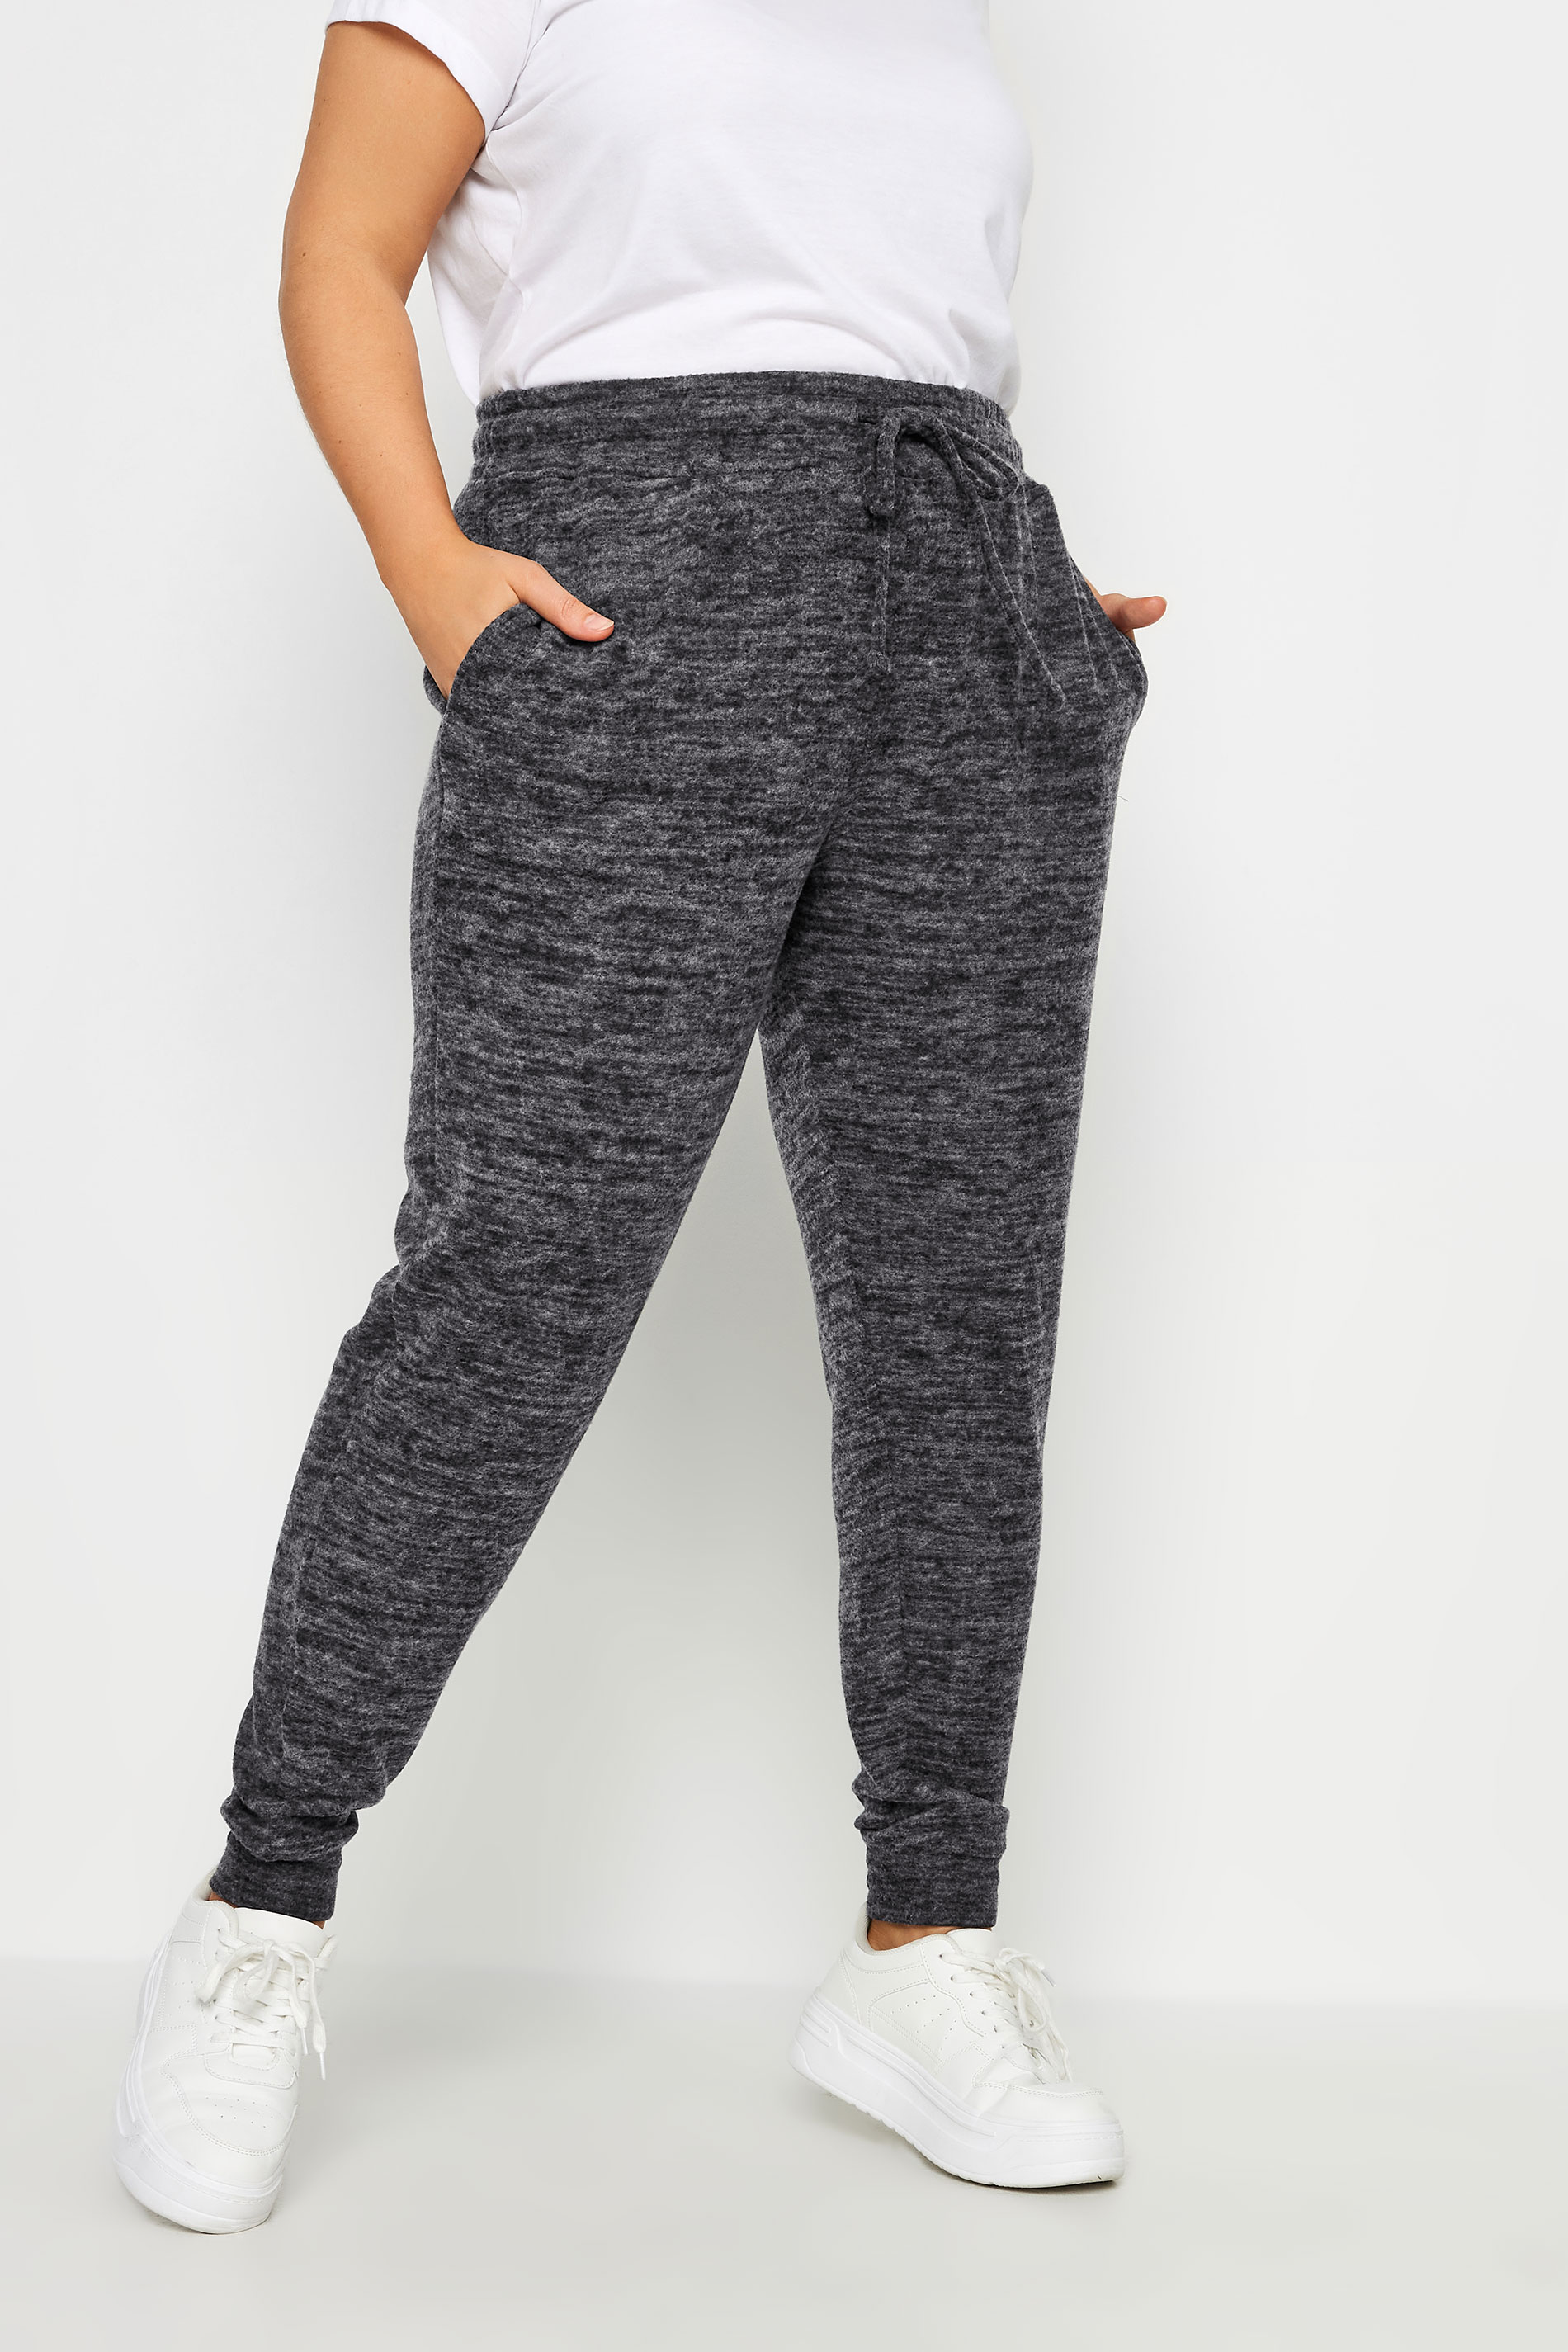 YOURS Plus Size Charcoal Grey Marl Soft Touch Cuffed Joggers | Yours Clothing 1